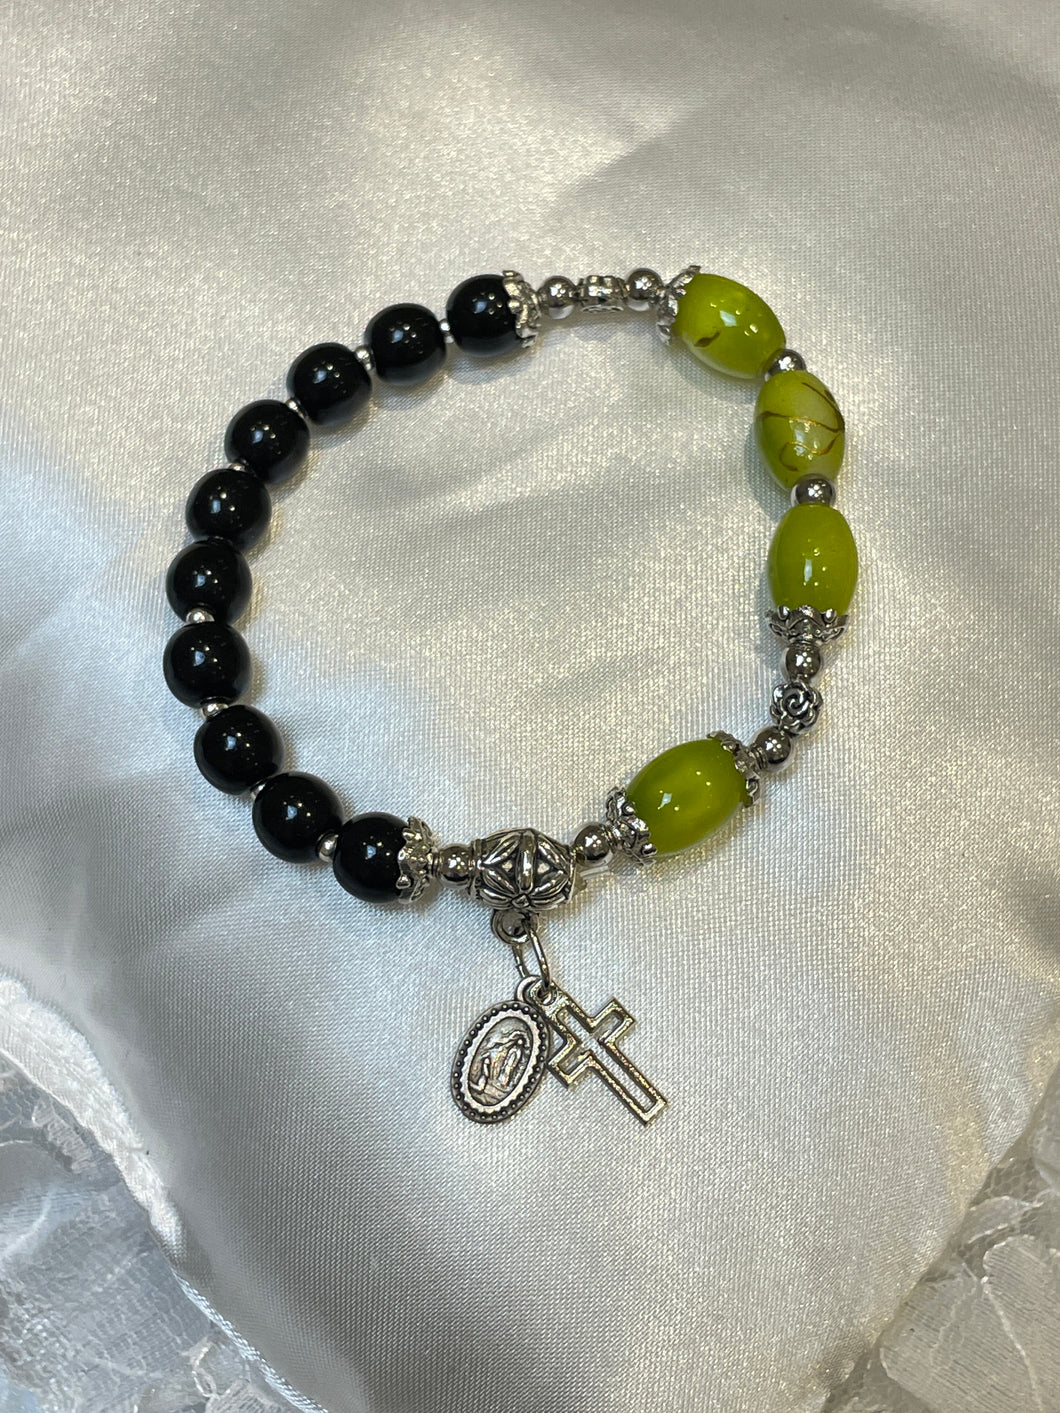 Black and Olive Green Rosary Bracelet with Charms